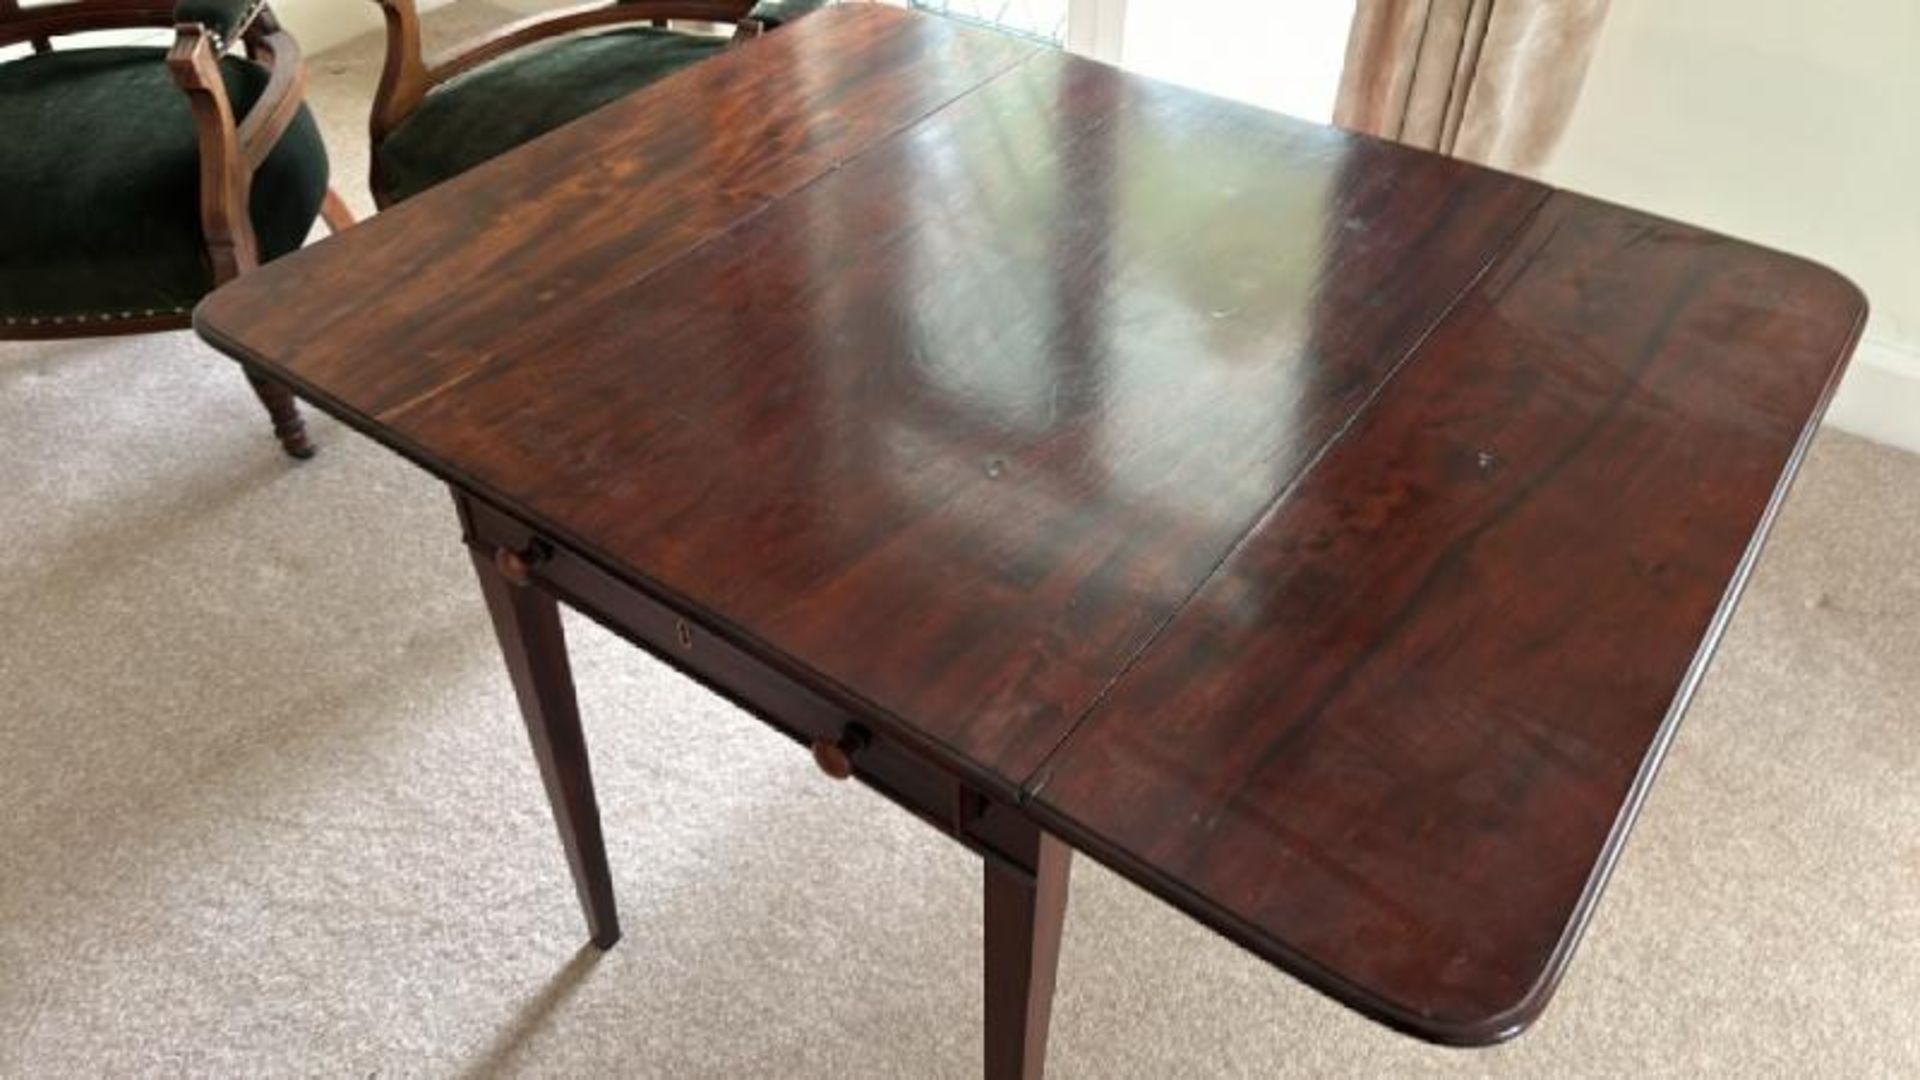 Mahogany fold out table, 102 x 81 x 64 (open) (collection from private residence in Weybridge, - Bild 2 aus 5